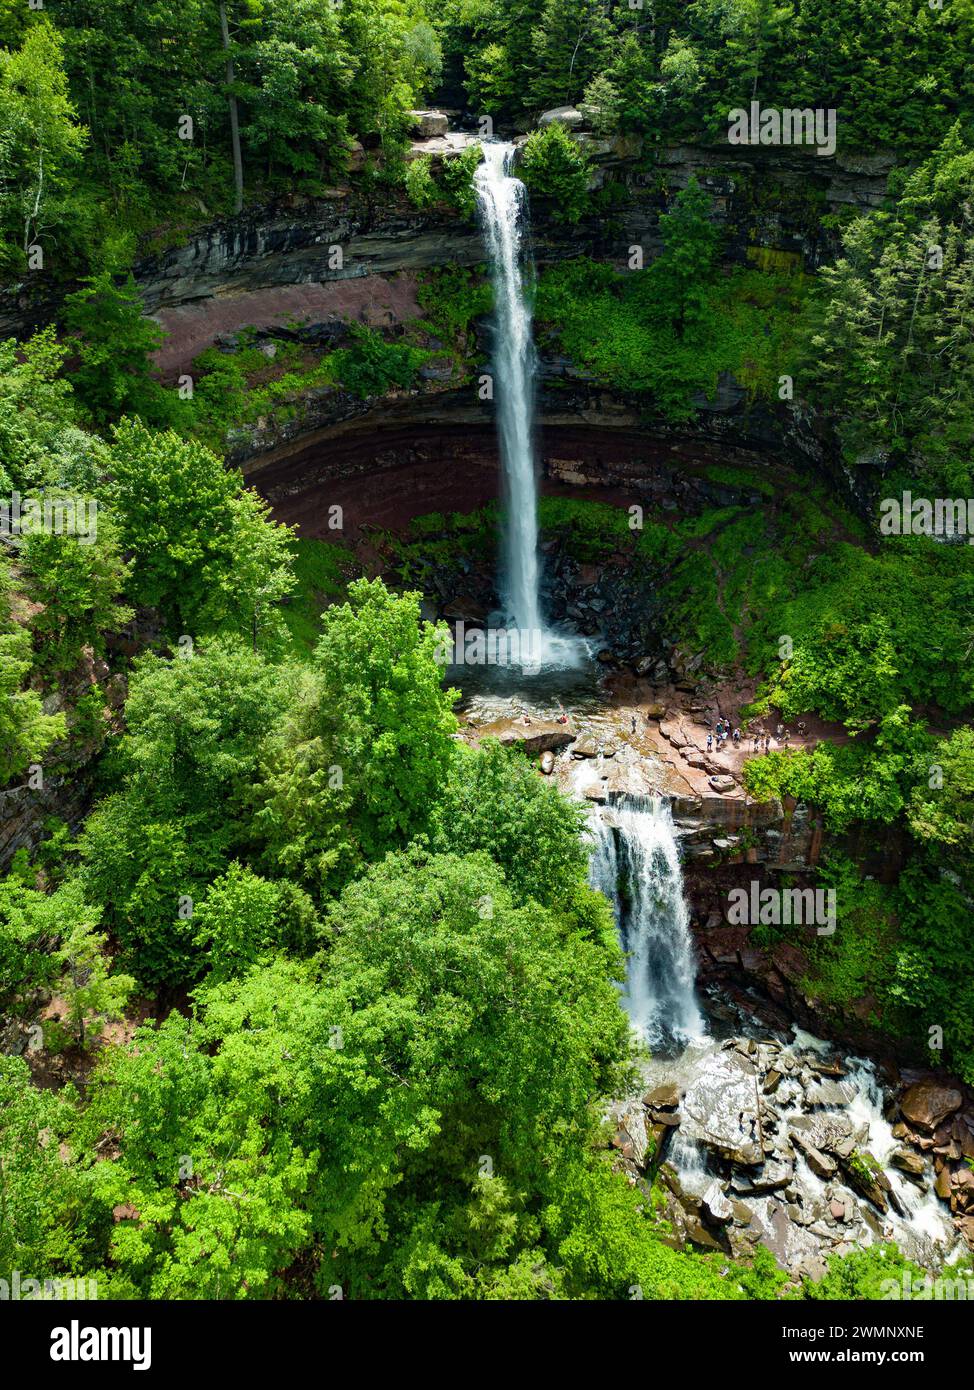 Elevated view drone photography of Kaaterskill Falls a two-stage waterfall on Spruce Creek in the eastern Catskill Mountains of New York, between the Stock Photo